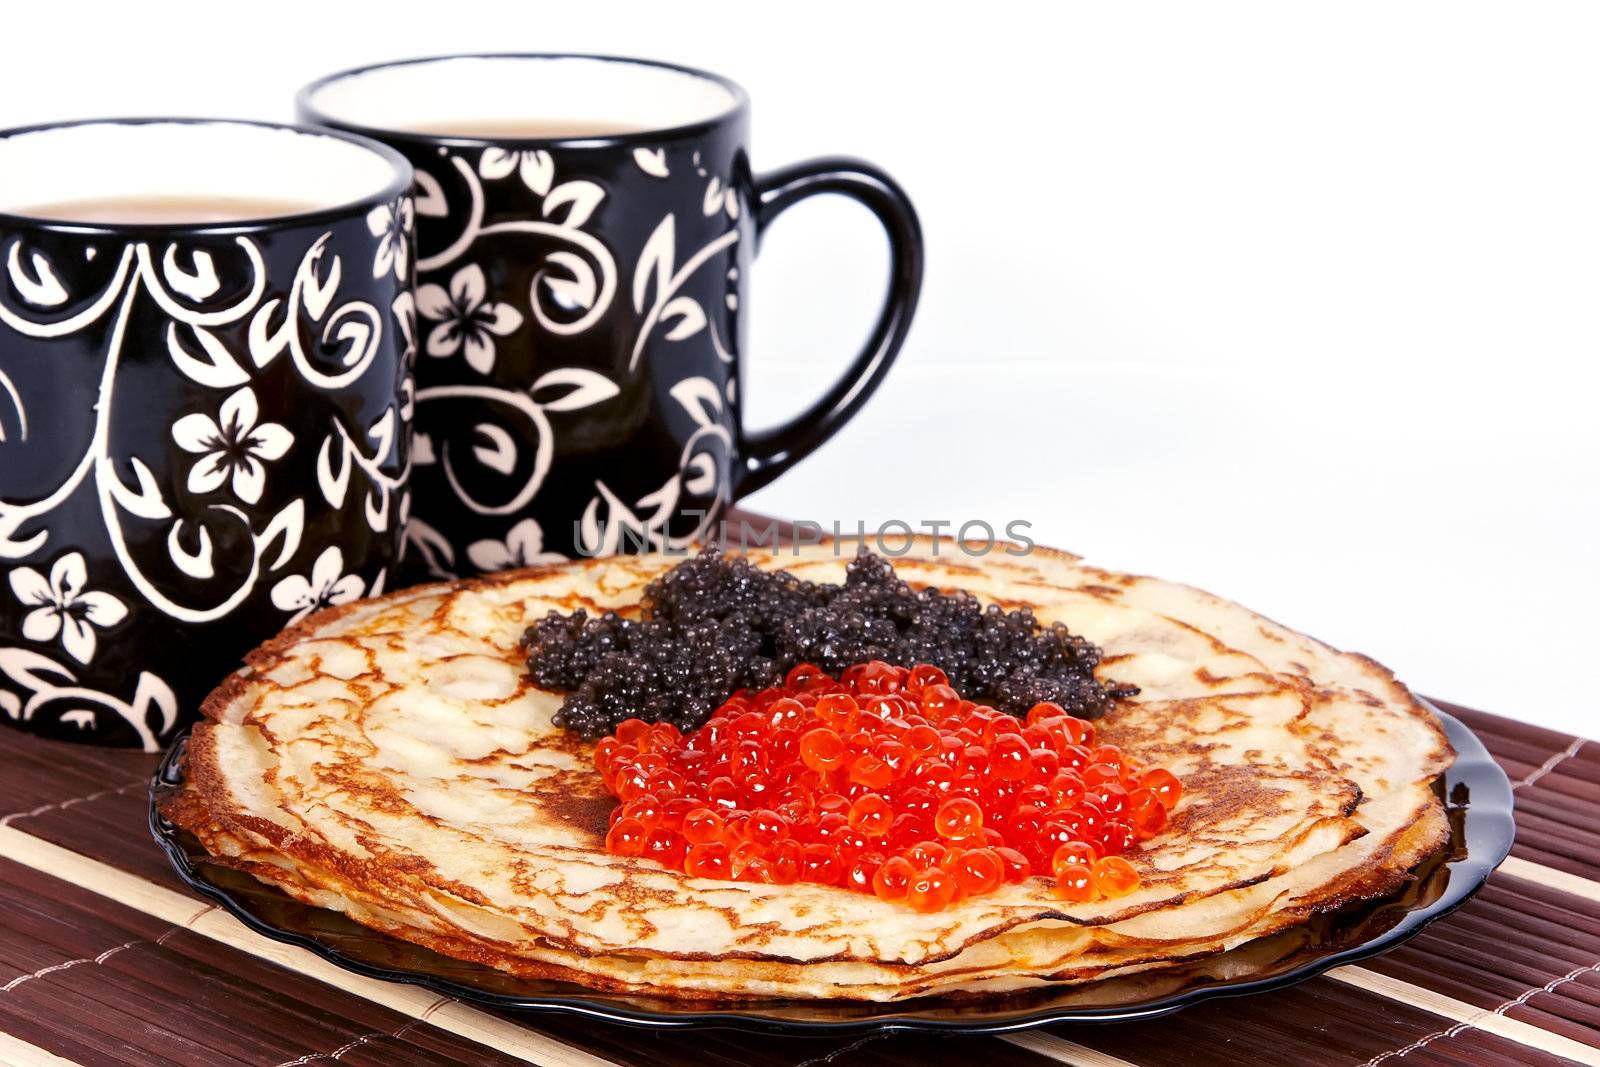 Cups with tea and a pile of pancakes with caviar on a plate